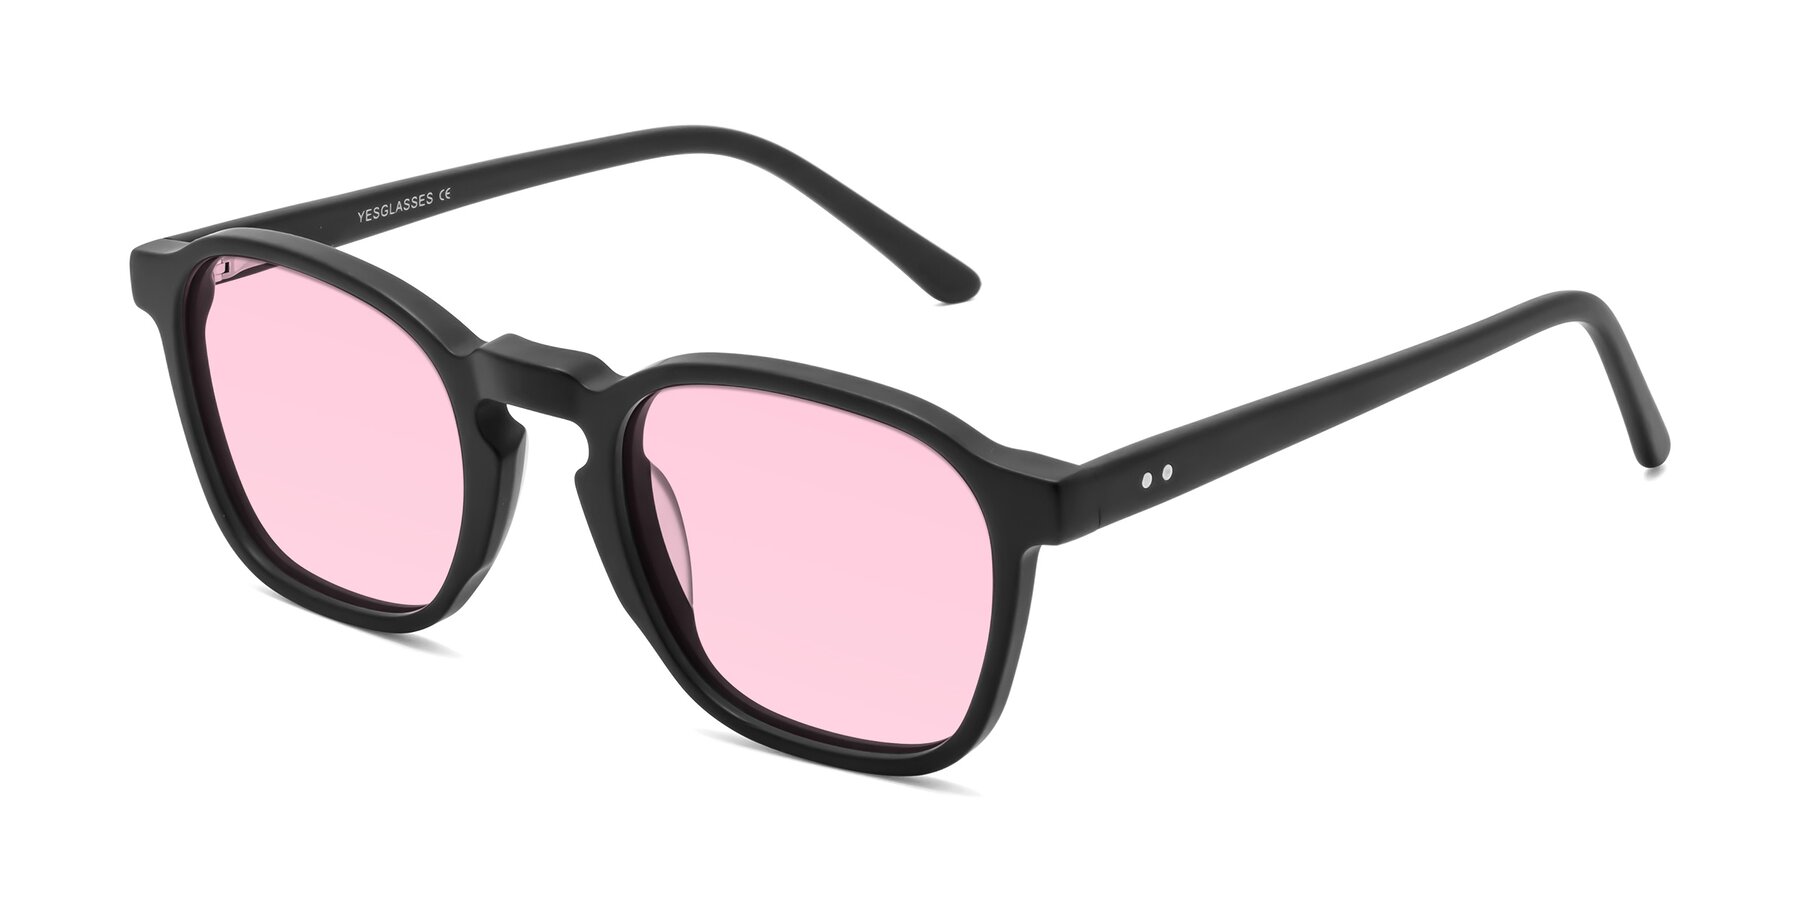 Angle of Generous in Matte Black with Light Pink Tinted Lenses